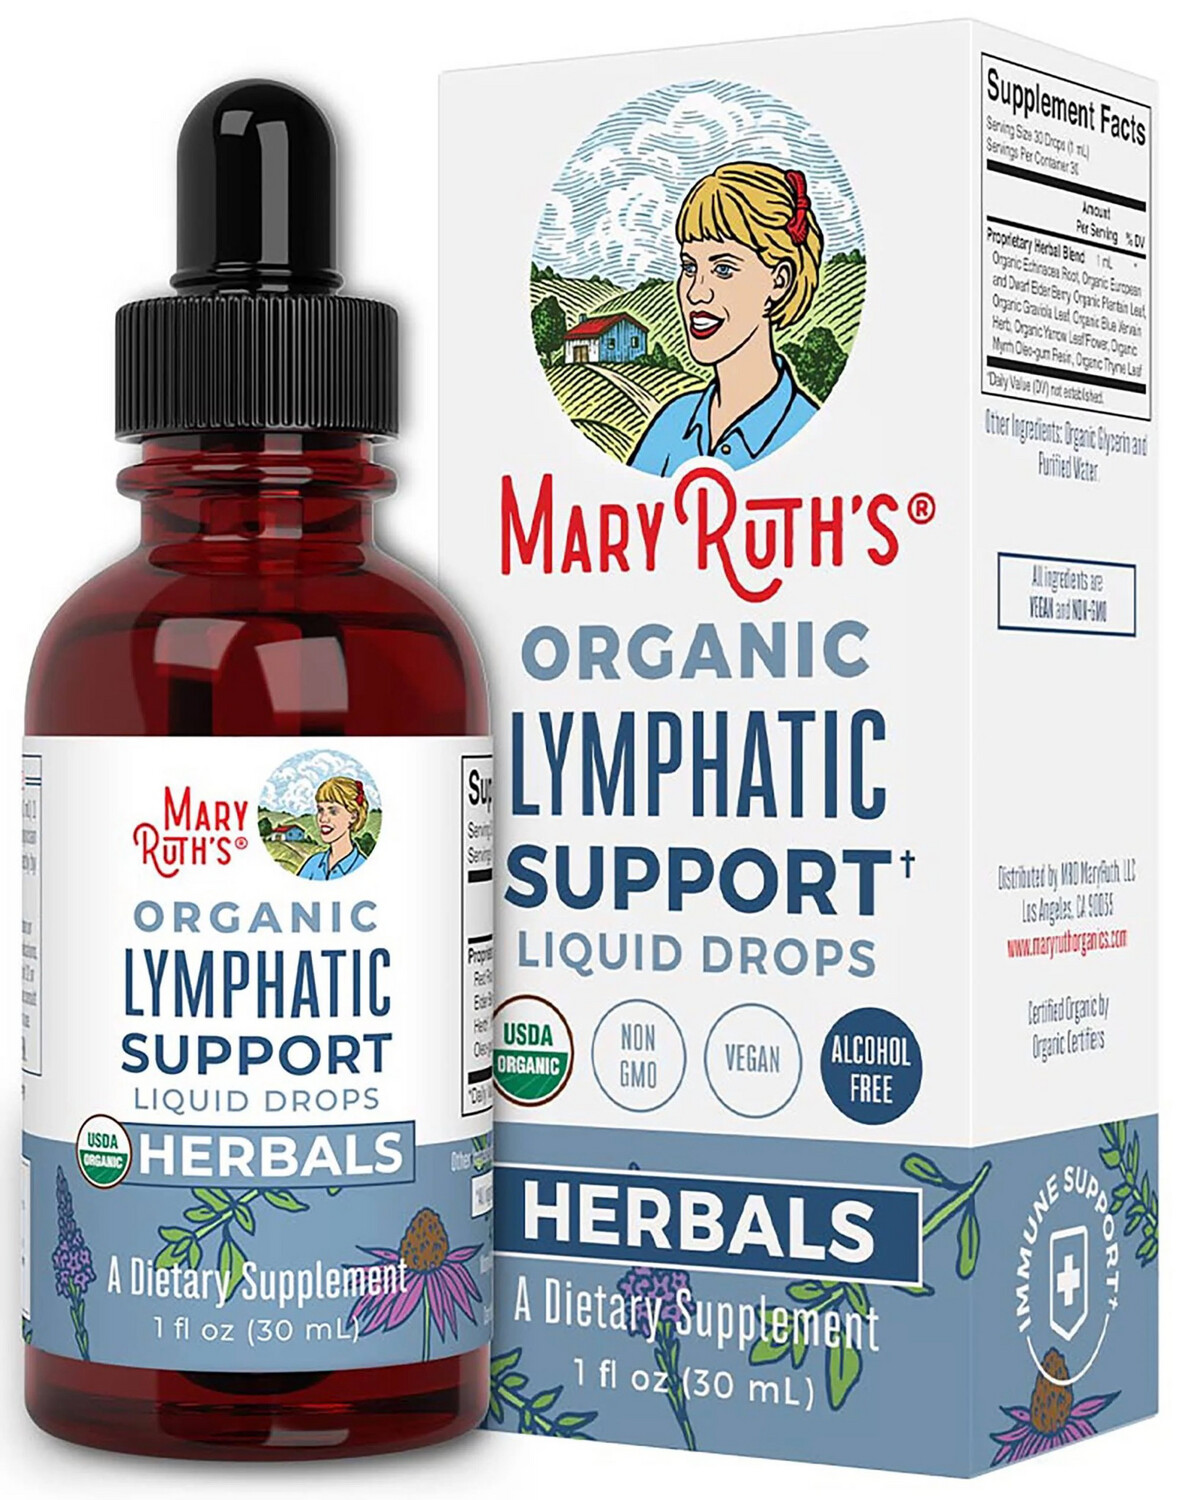 Mary Ruth's Lymphatic Support Liquid Drops